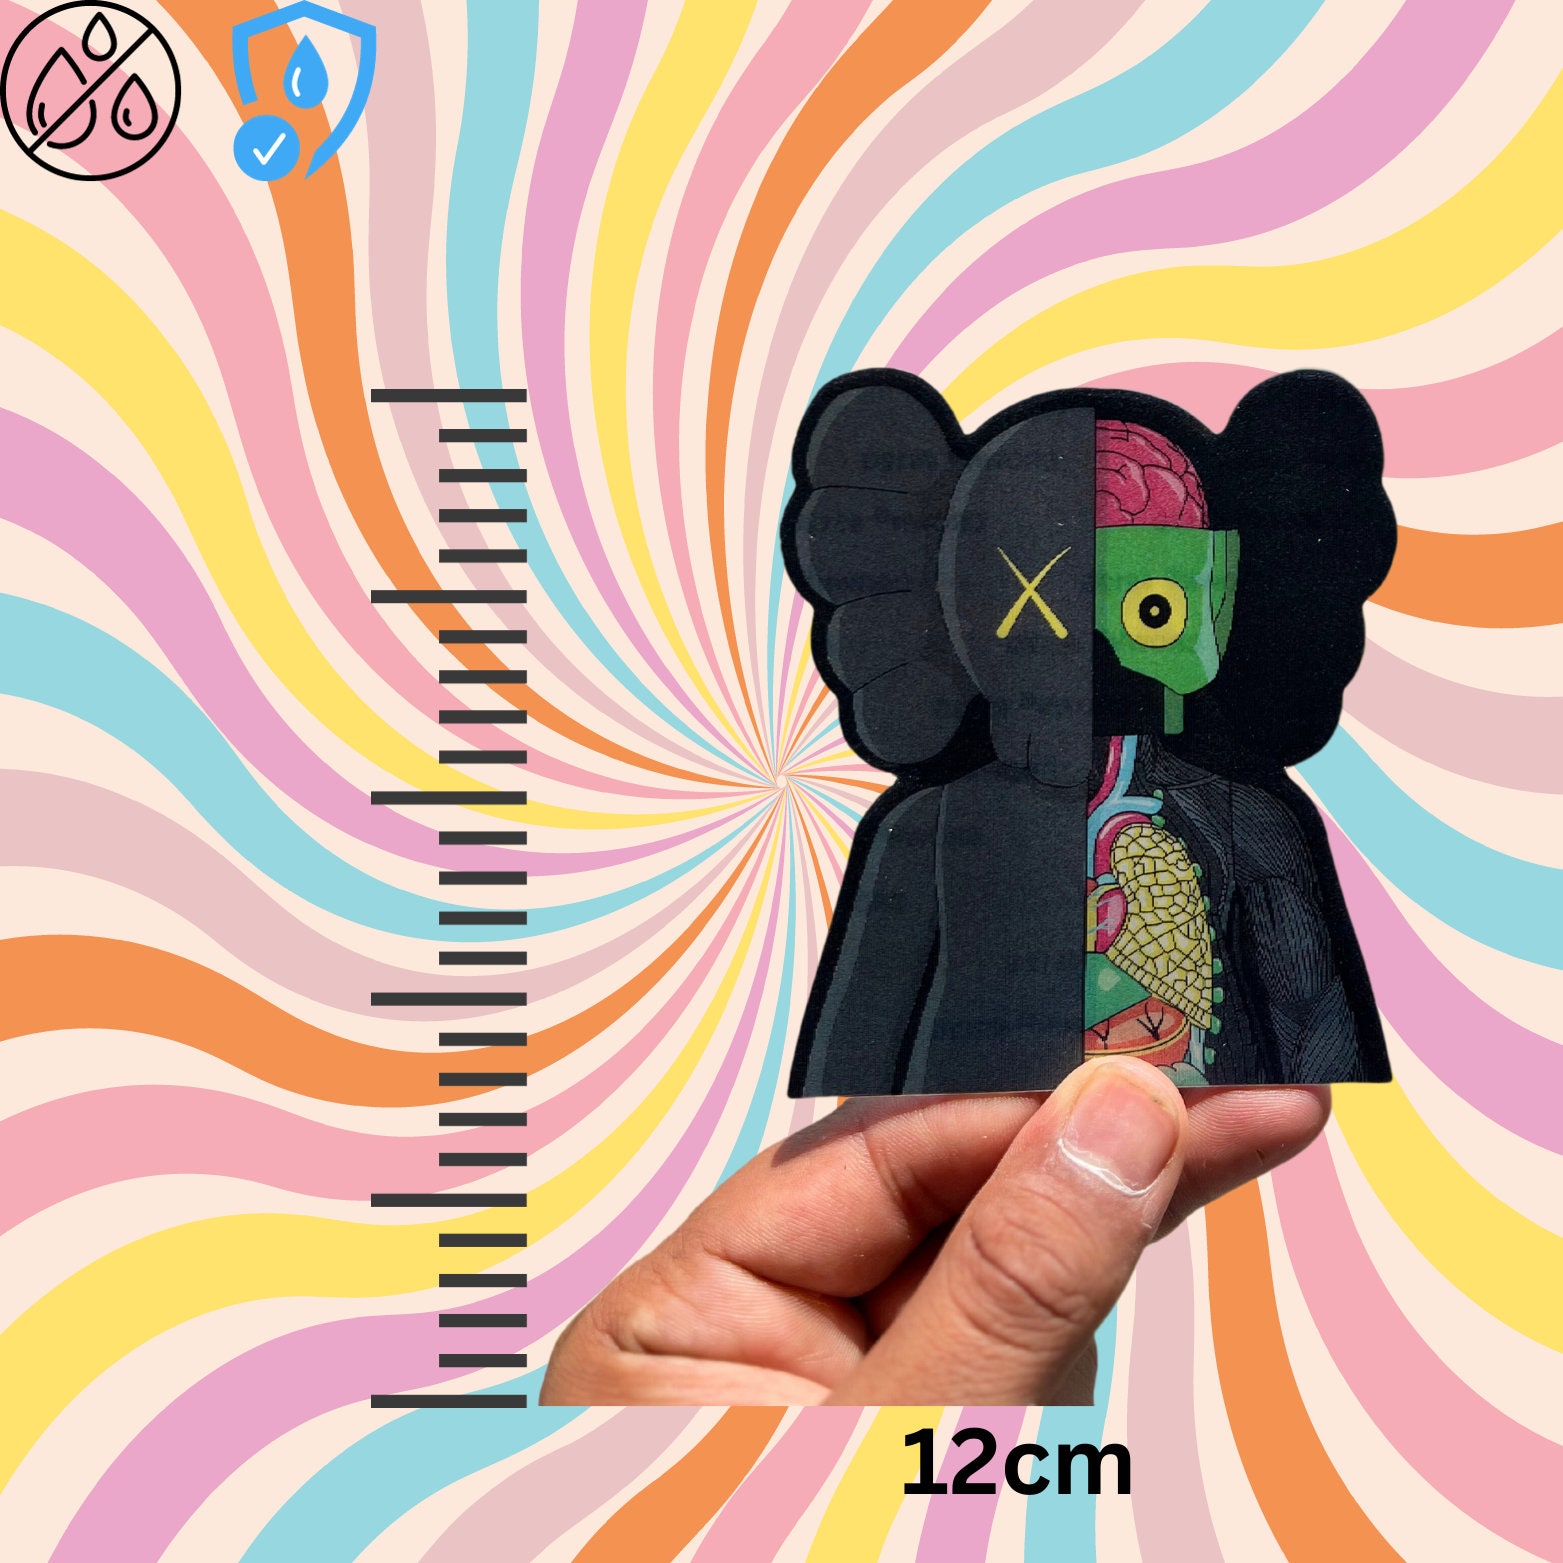 5D Motion Kaws Sticker More Than 20 Designs to Choose From 